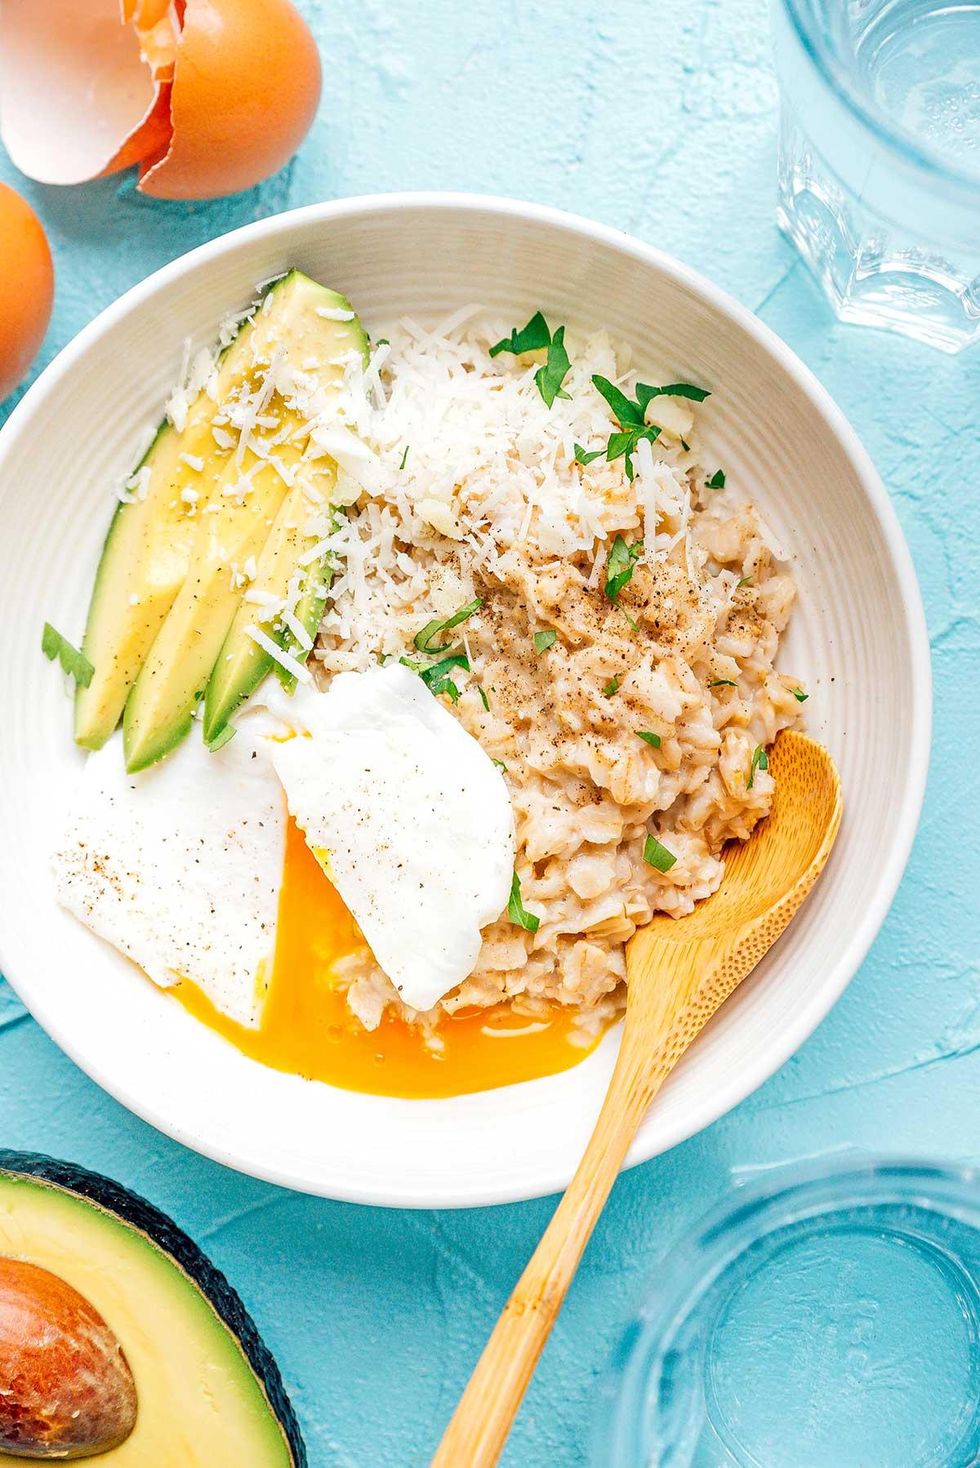 \u200bSavory Oatmeal With Avocado And Poached Egg